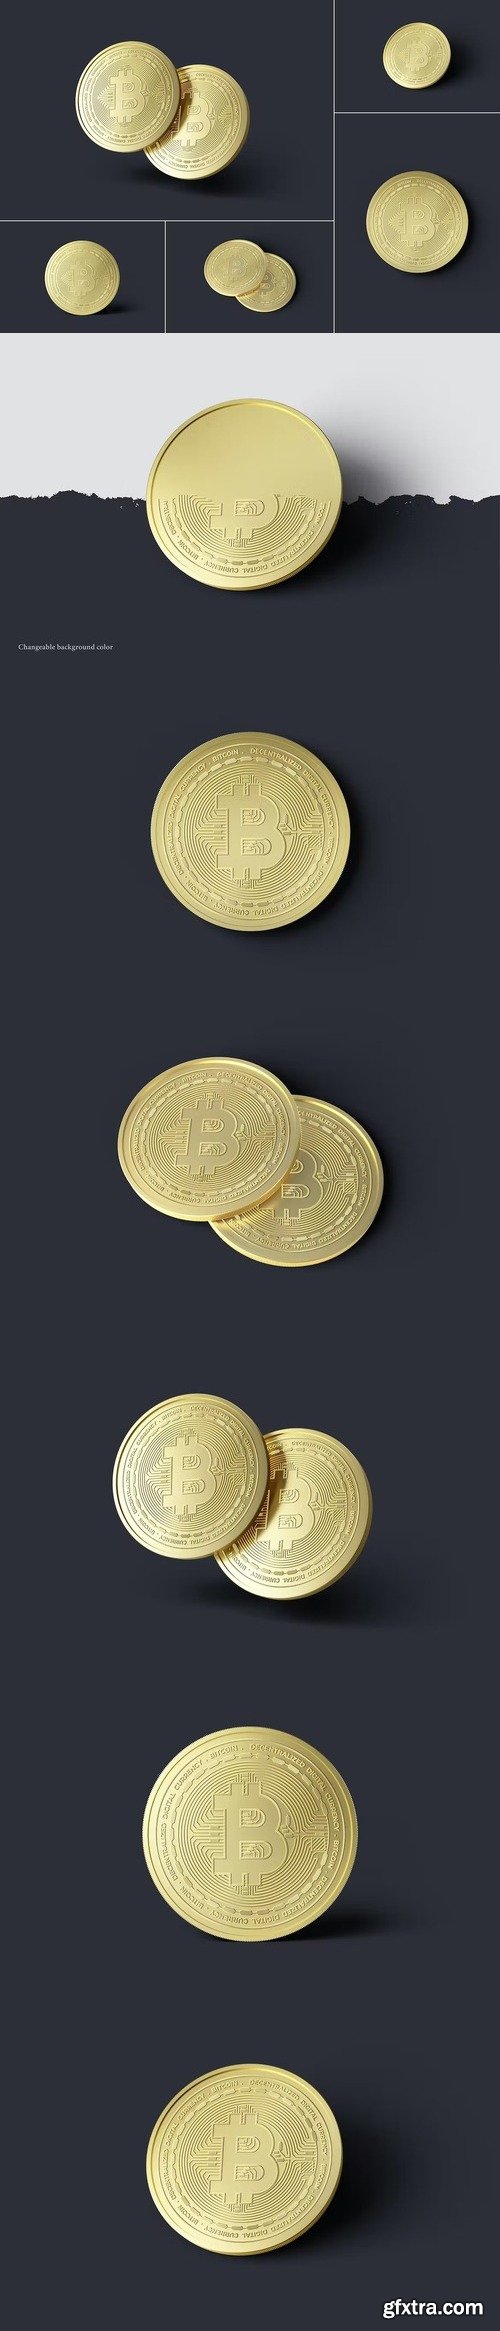 CreativeMarket - Gold Coin / Cryptocurrency Mockups 10274831